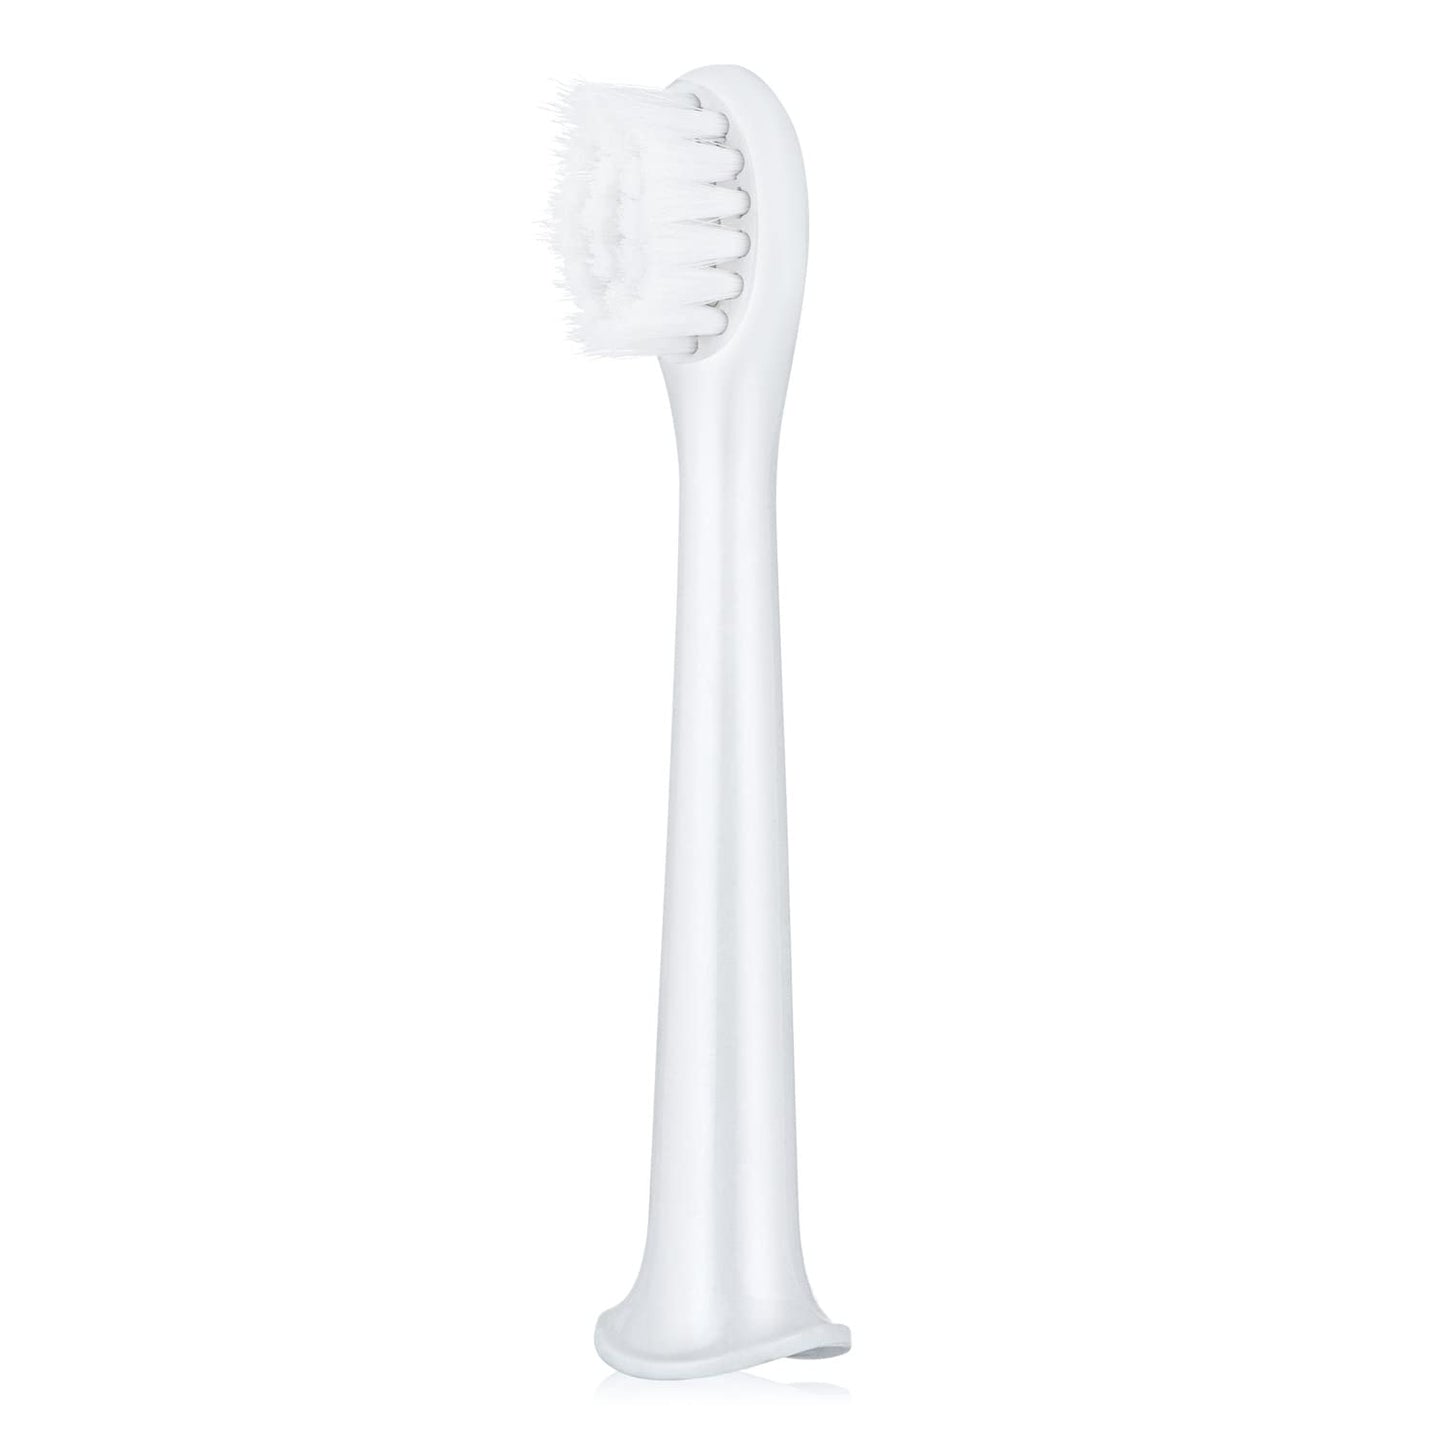 U-Shape Electric Toothbrush 4 Pieces Replacement Head Kit - 1 Silicone U-Shape Brush Head & 3 Toothbrush Heads